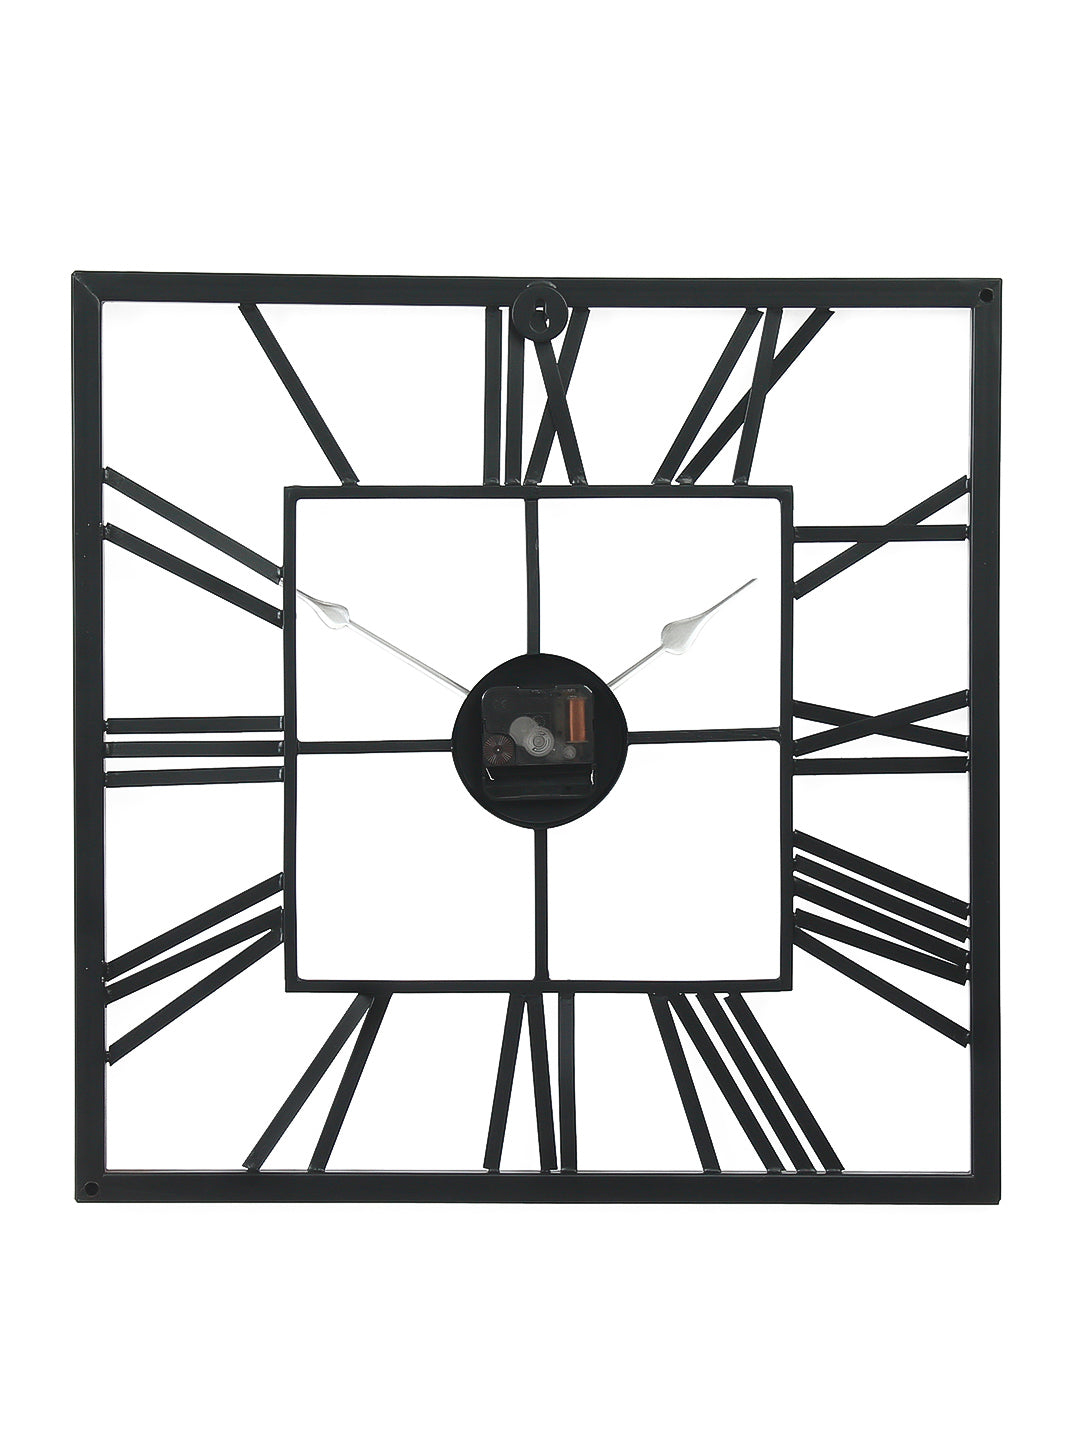 Black Iron Square Handcrafted Analog Roman Numeral Wall Clock Without Glass 6